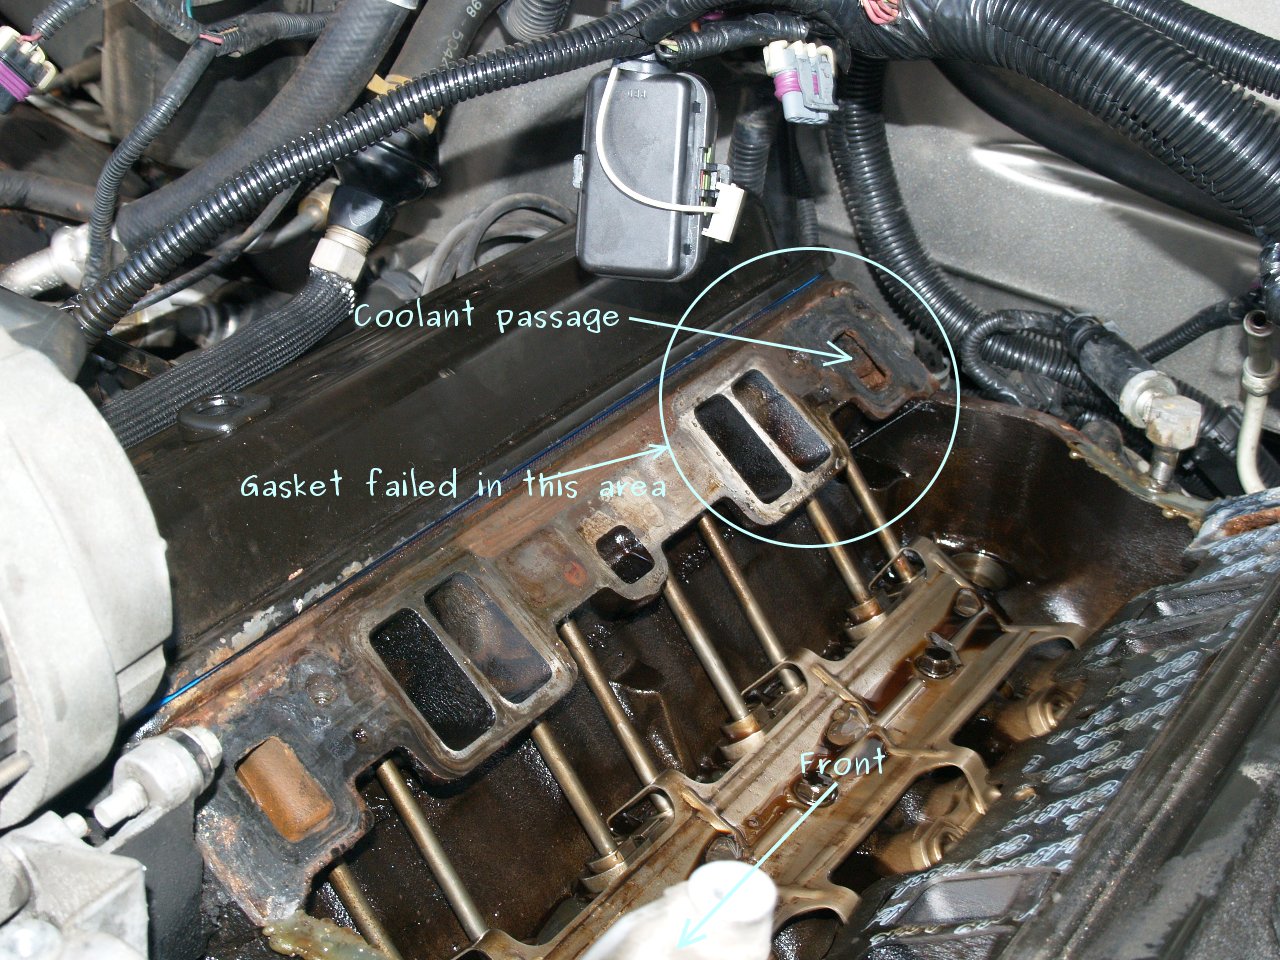 See P010C in engine